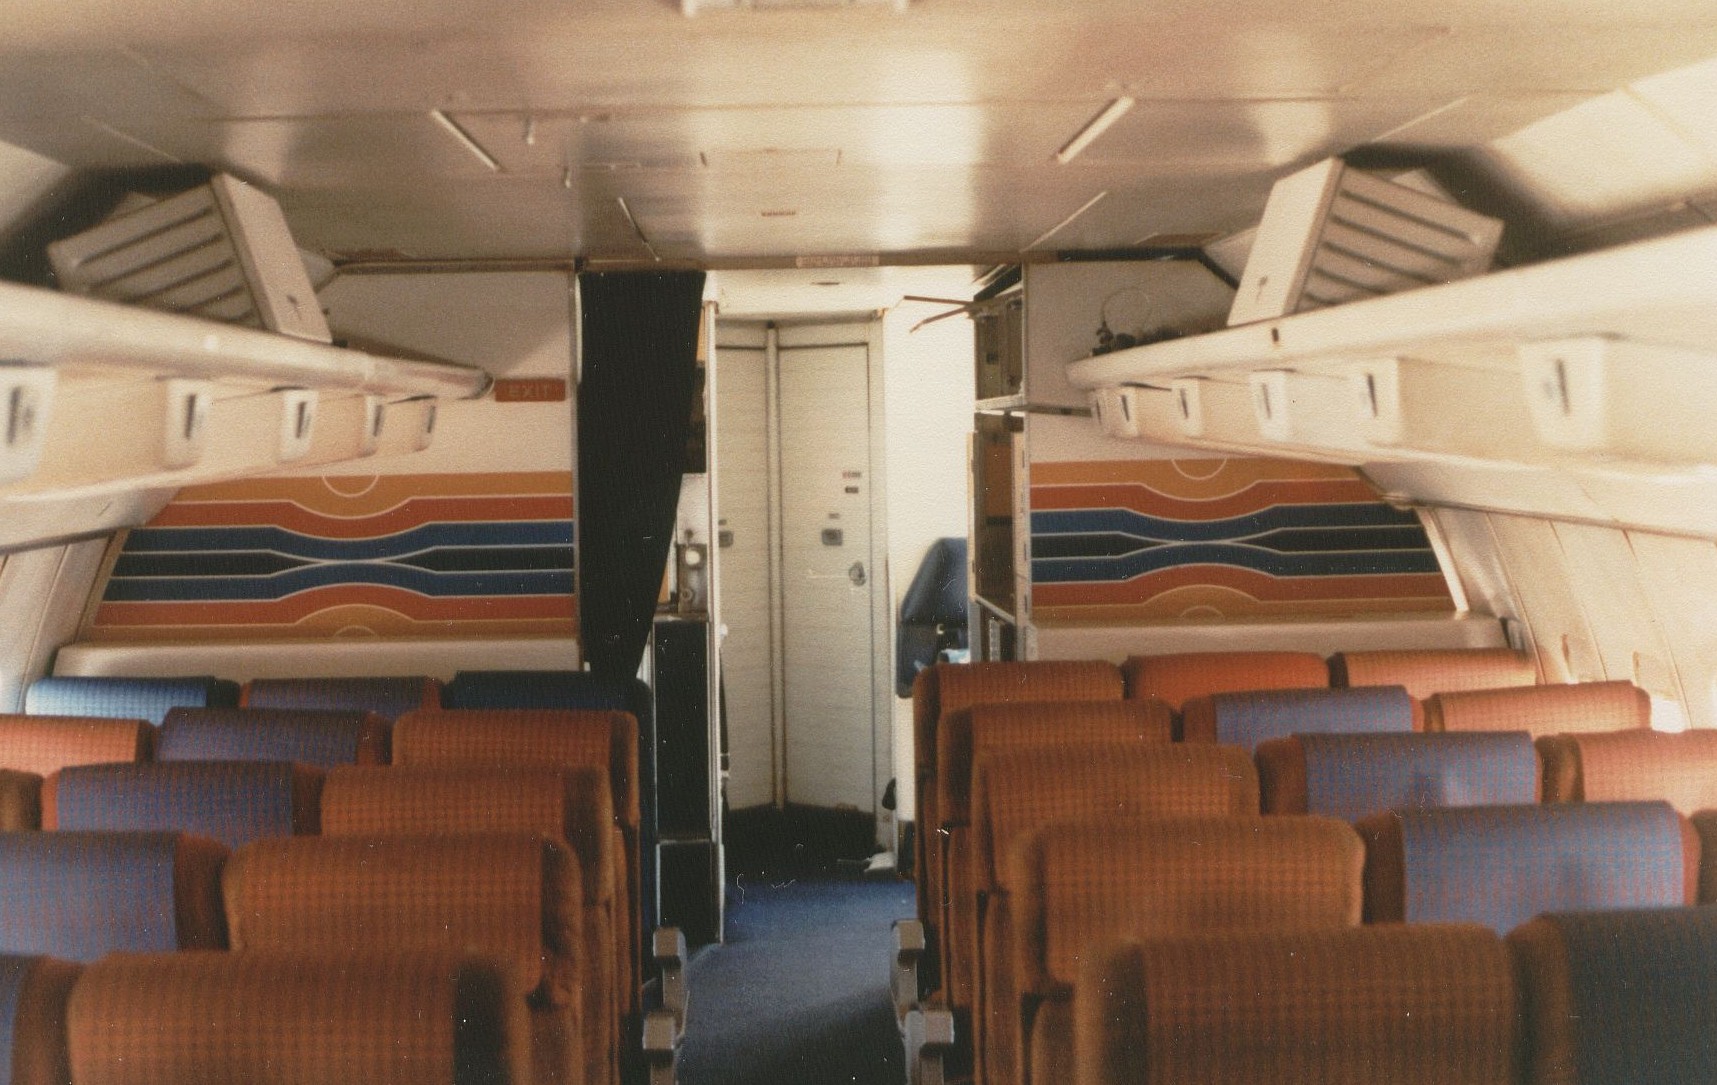 August 1981 The artwork on the rear bulkheads in the economy cabin of a Pan Am 707 were a stylized version of the famous Pan Am globe logo.